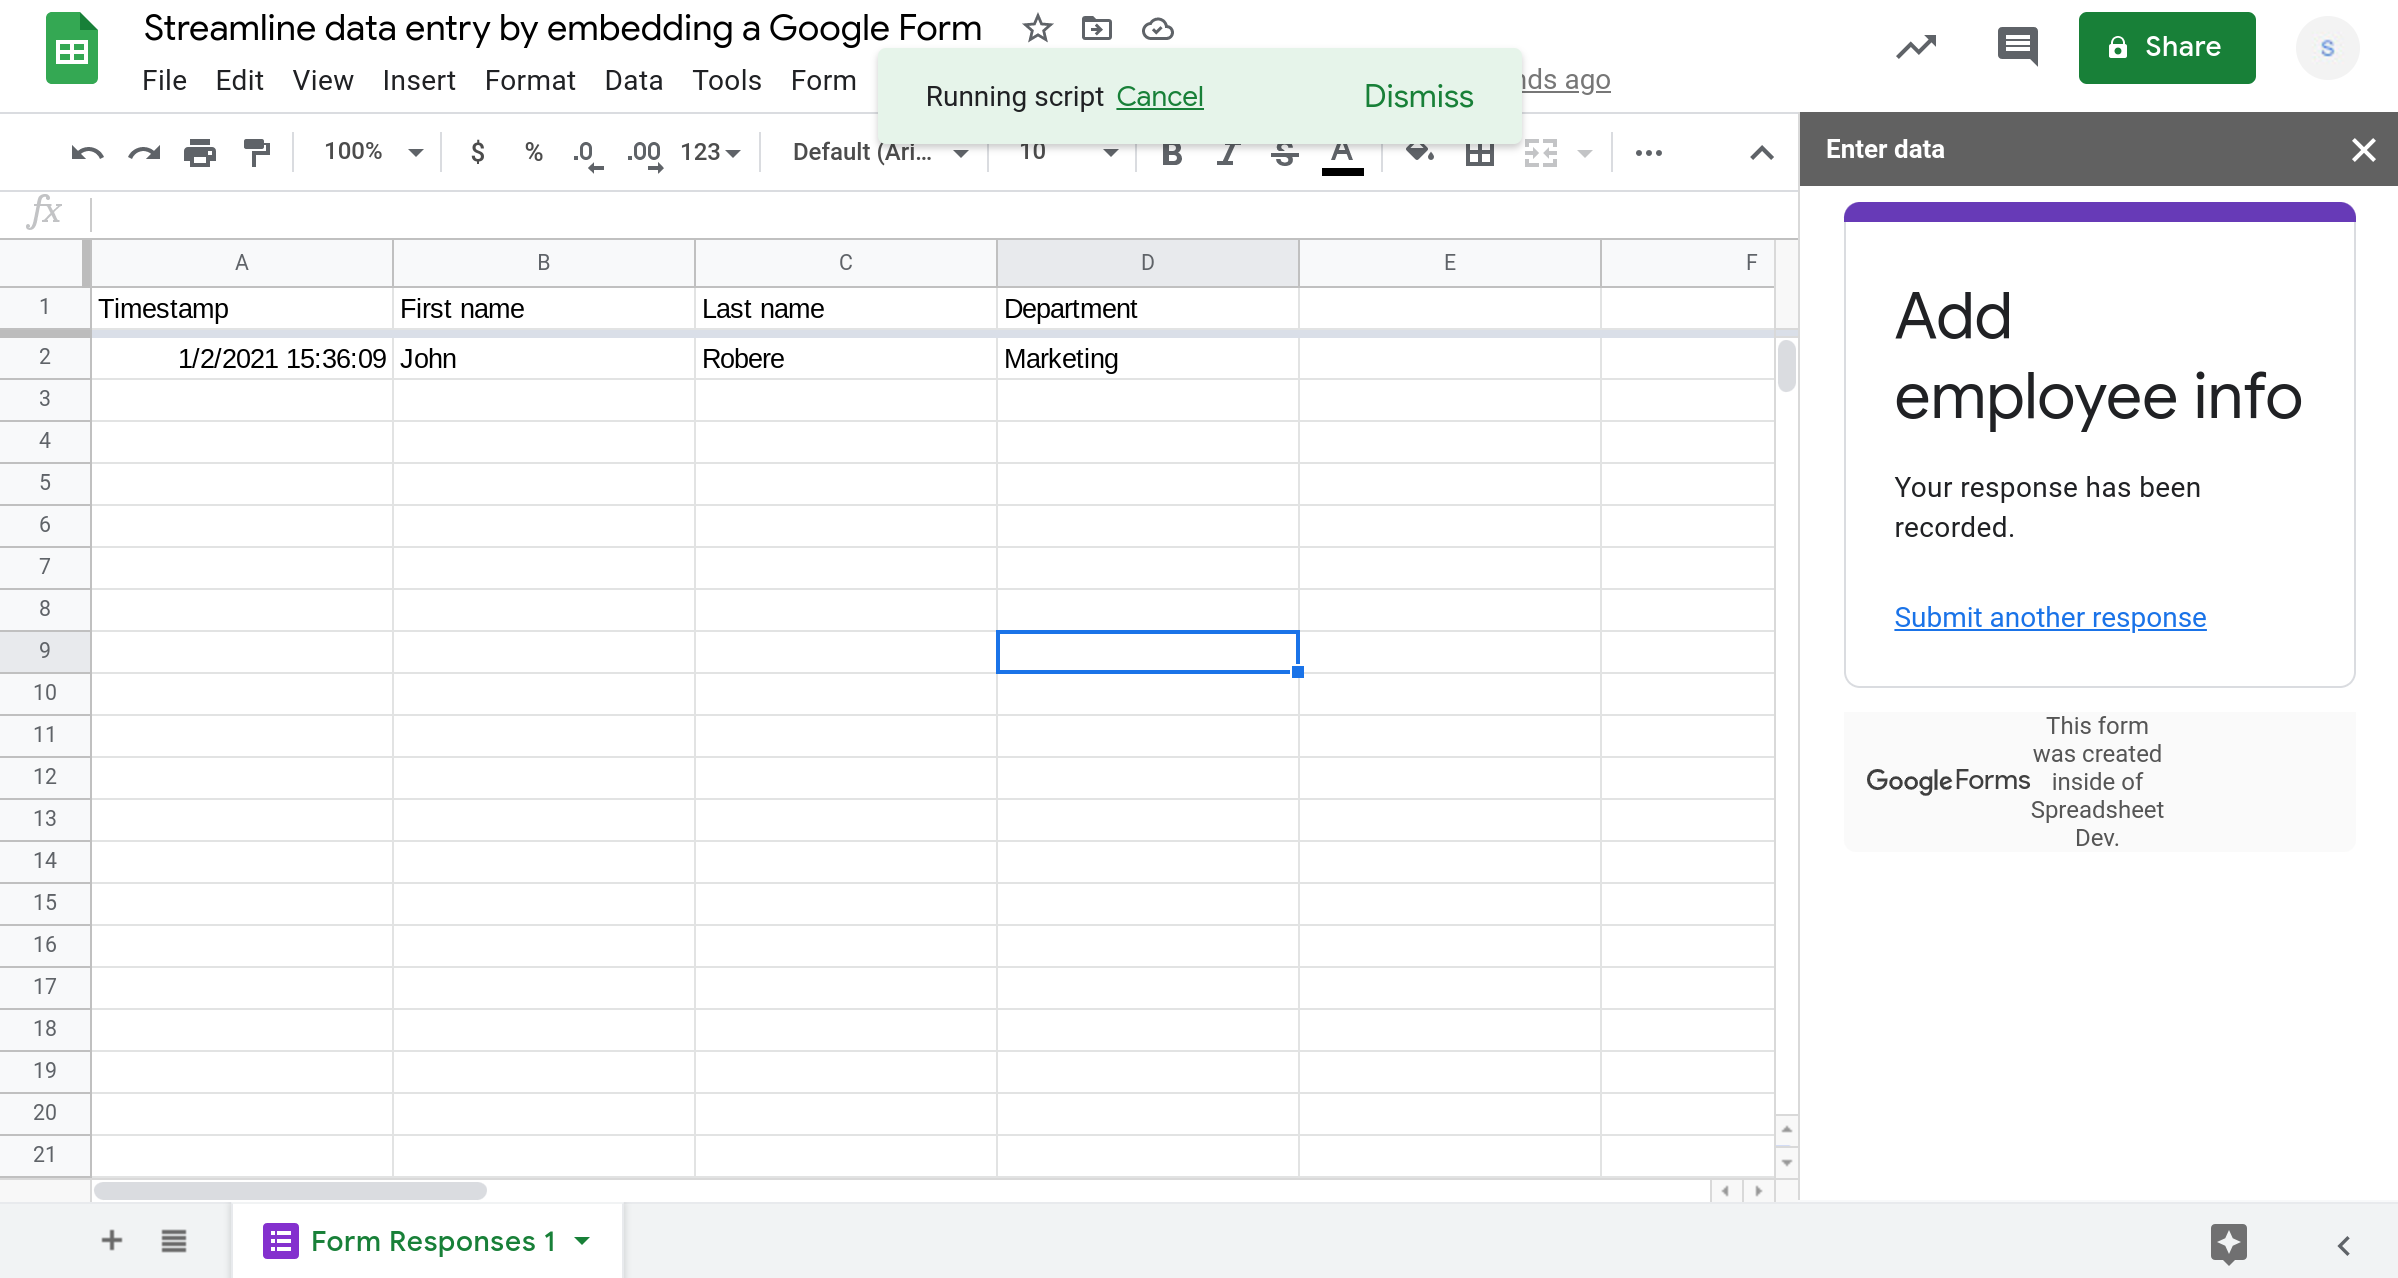 A screenshot of a Google Sheets spreadsheet with a embedded Google Form in a sidebar. The form was just submitted successfully.